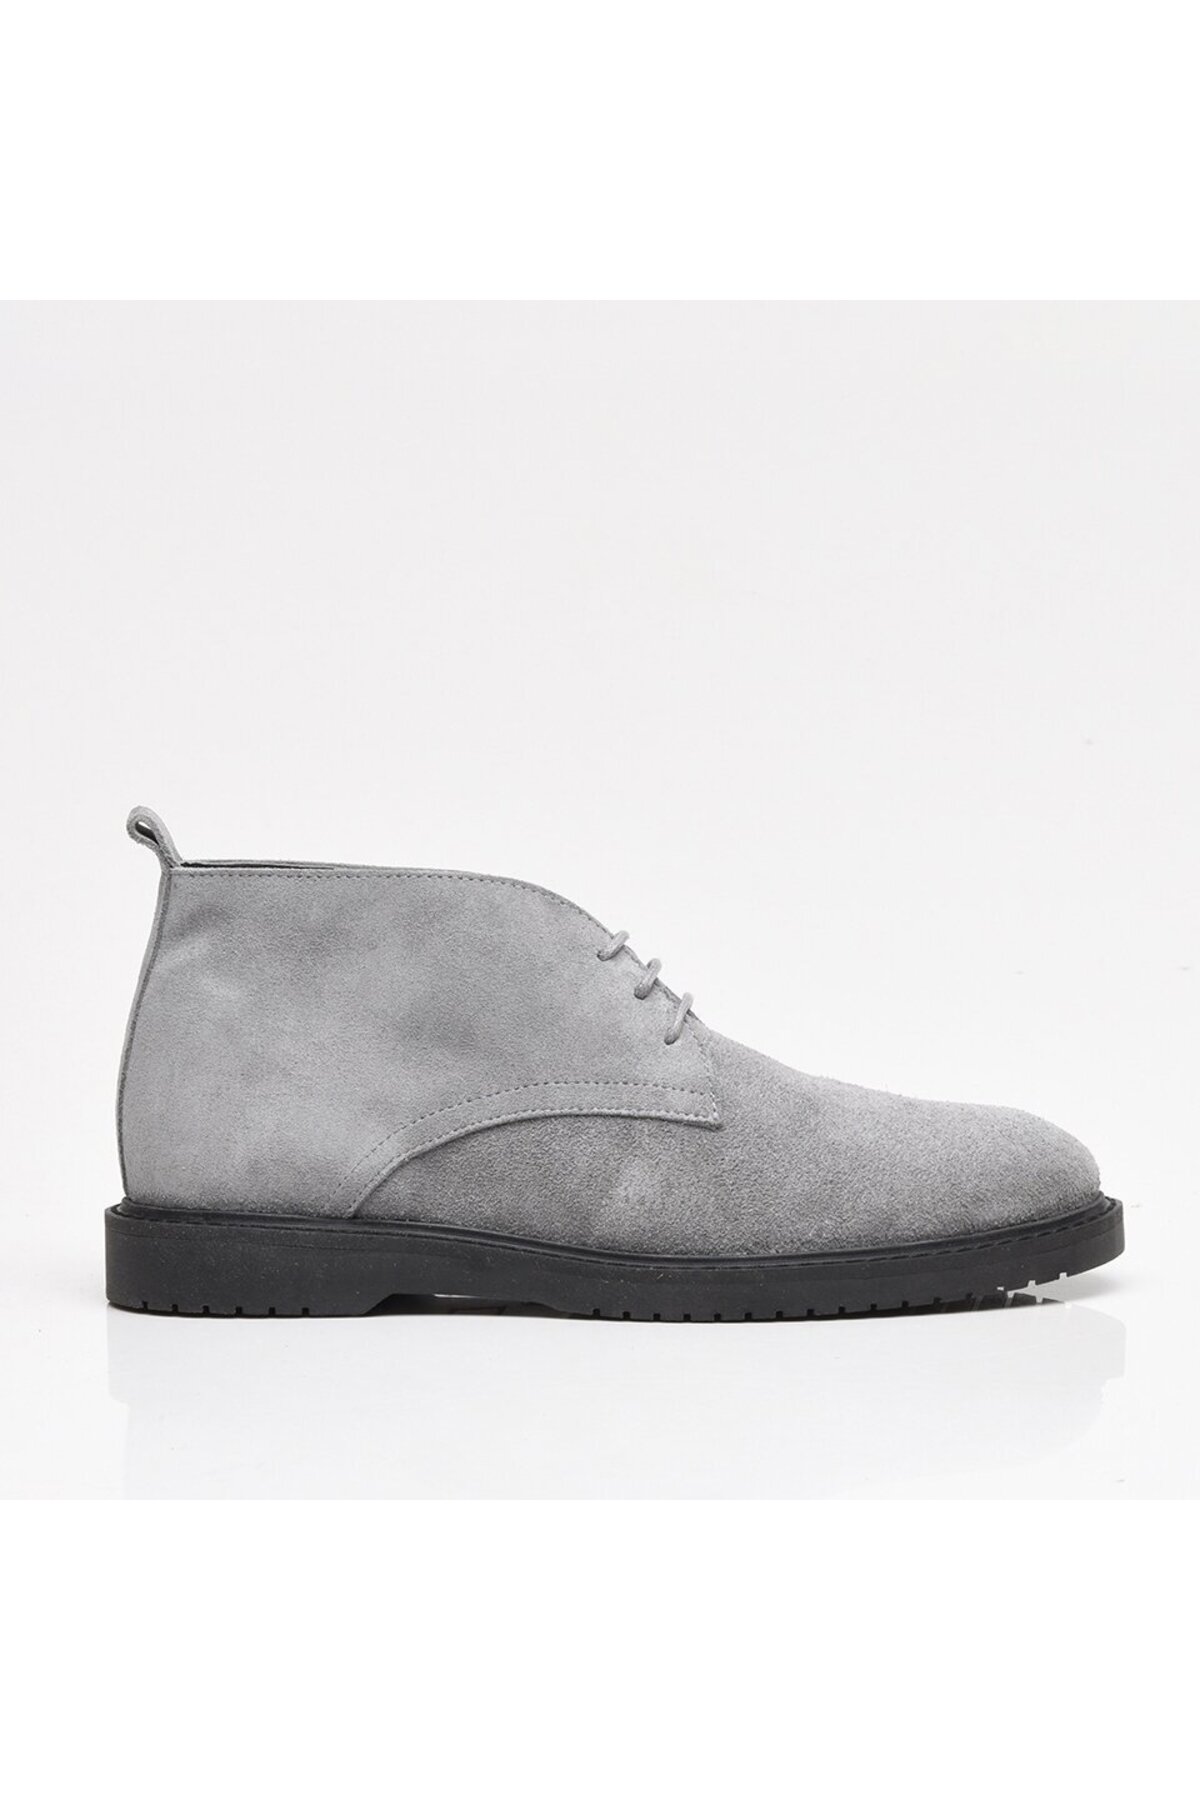 Hotiç Genuine Leather Gray Men's Casual Boots